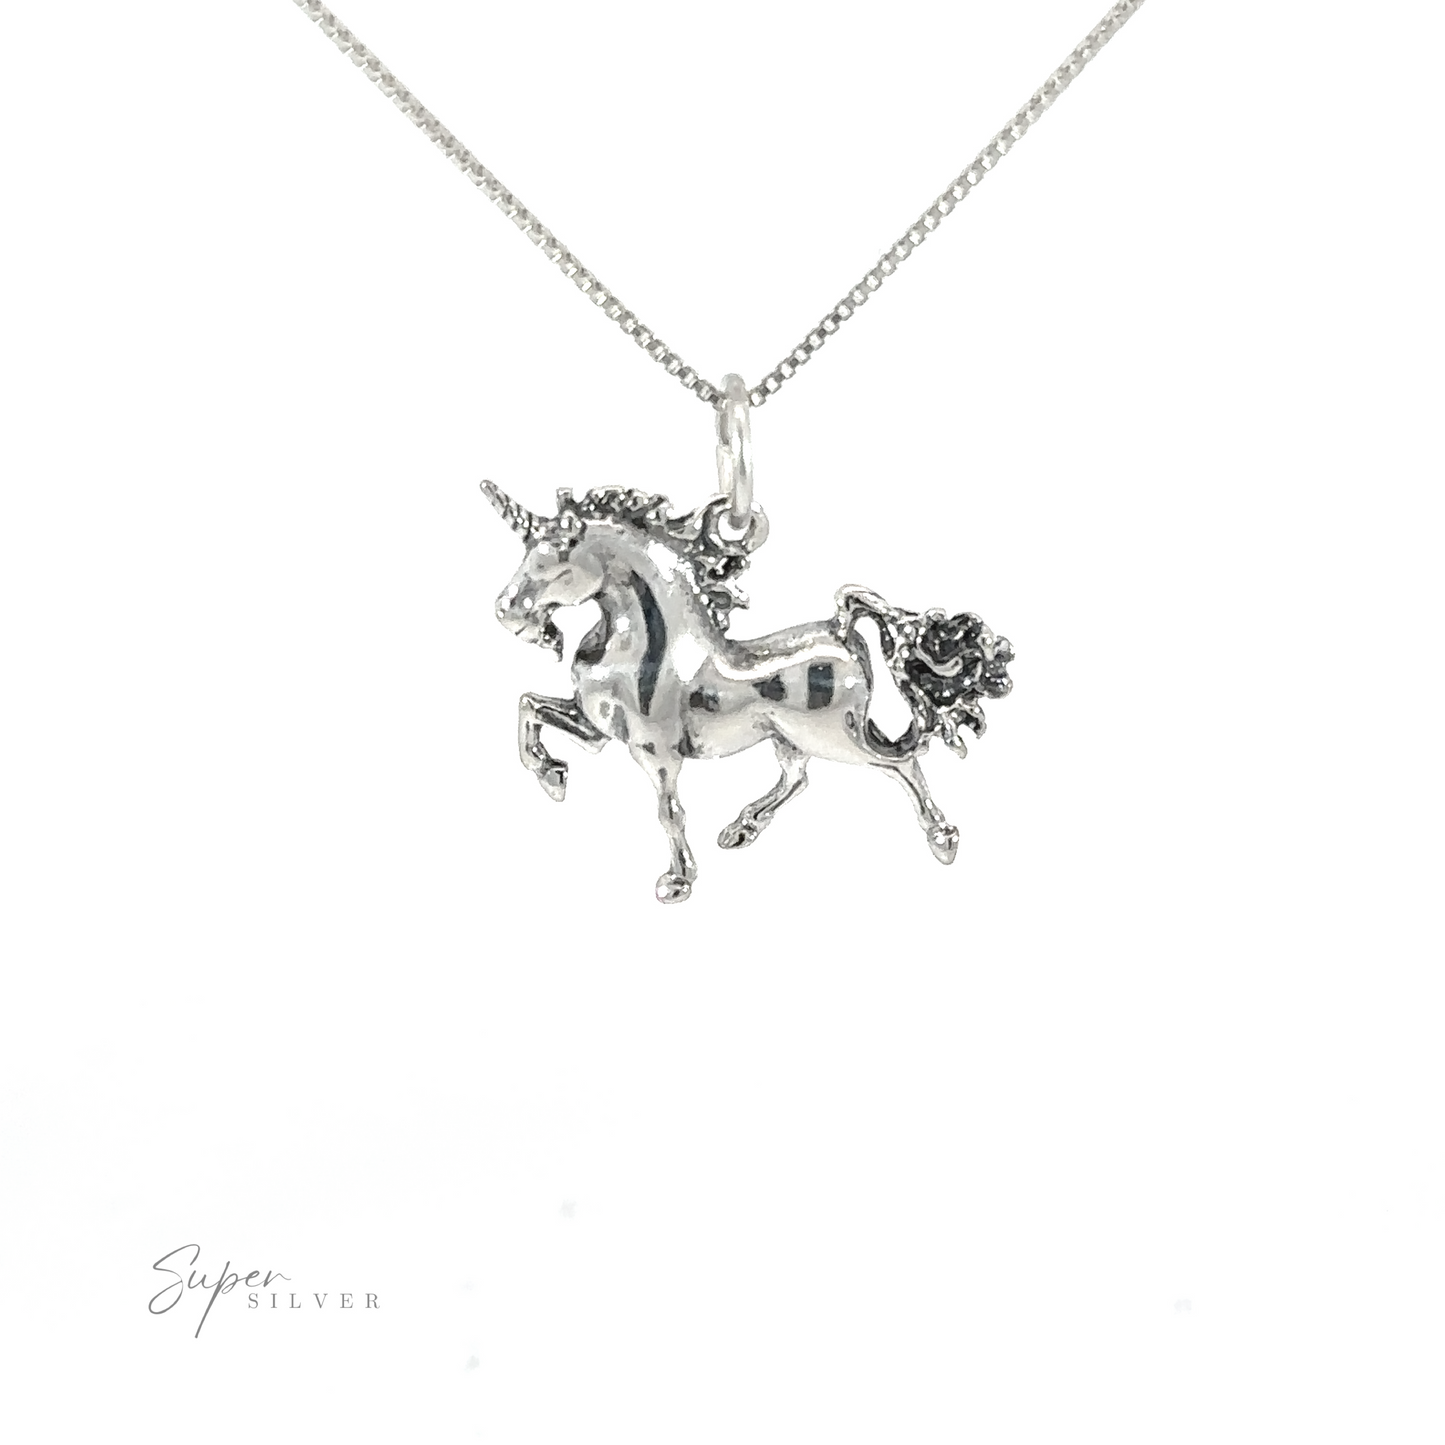 A .925 Sterling Silver Unicorn Charm with detailed hair, on a chain.